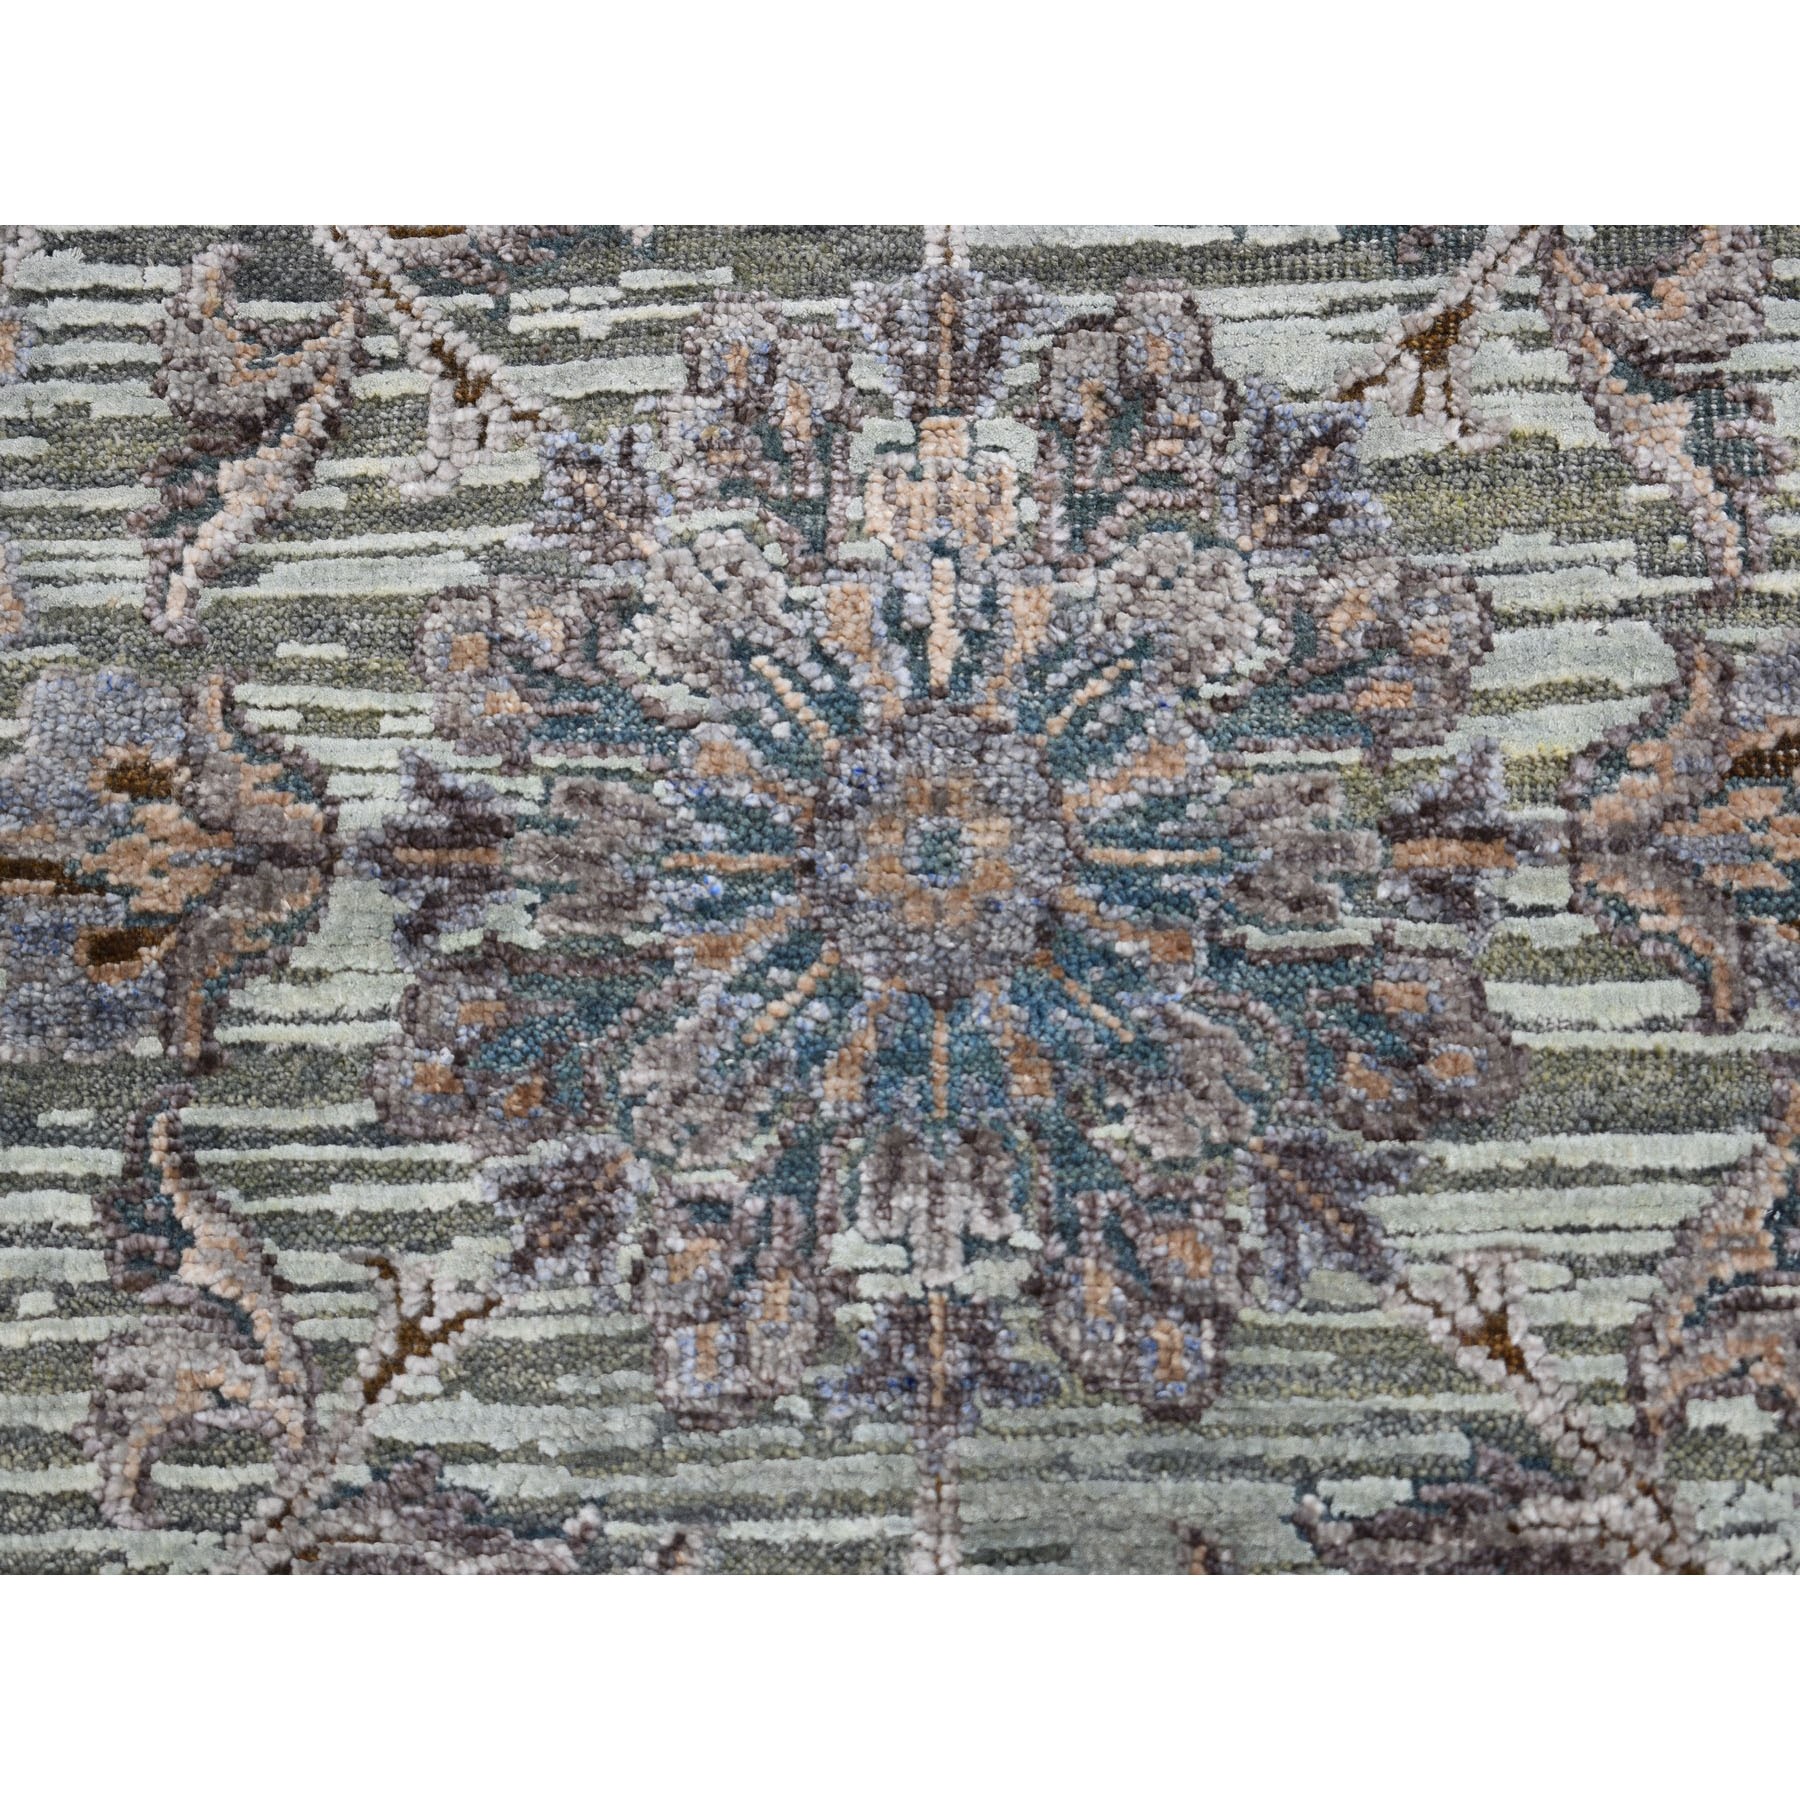 6-1 x9-1  Light Green Pure Silk With Textured Wool Mughal Design Hand Knotted Oriental Rug 